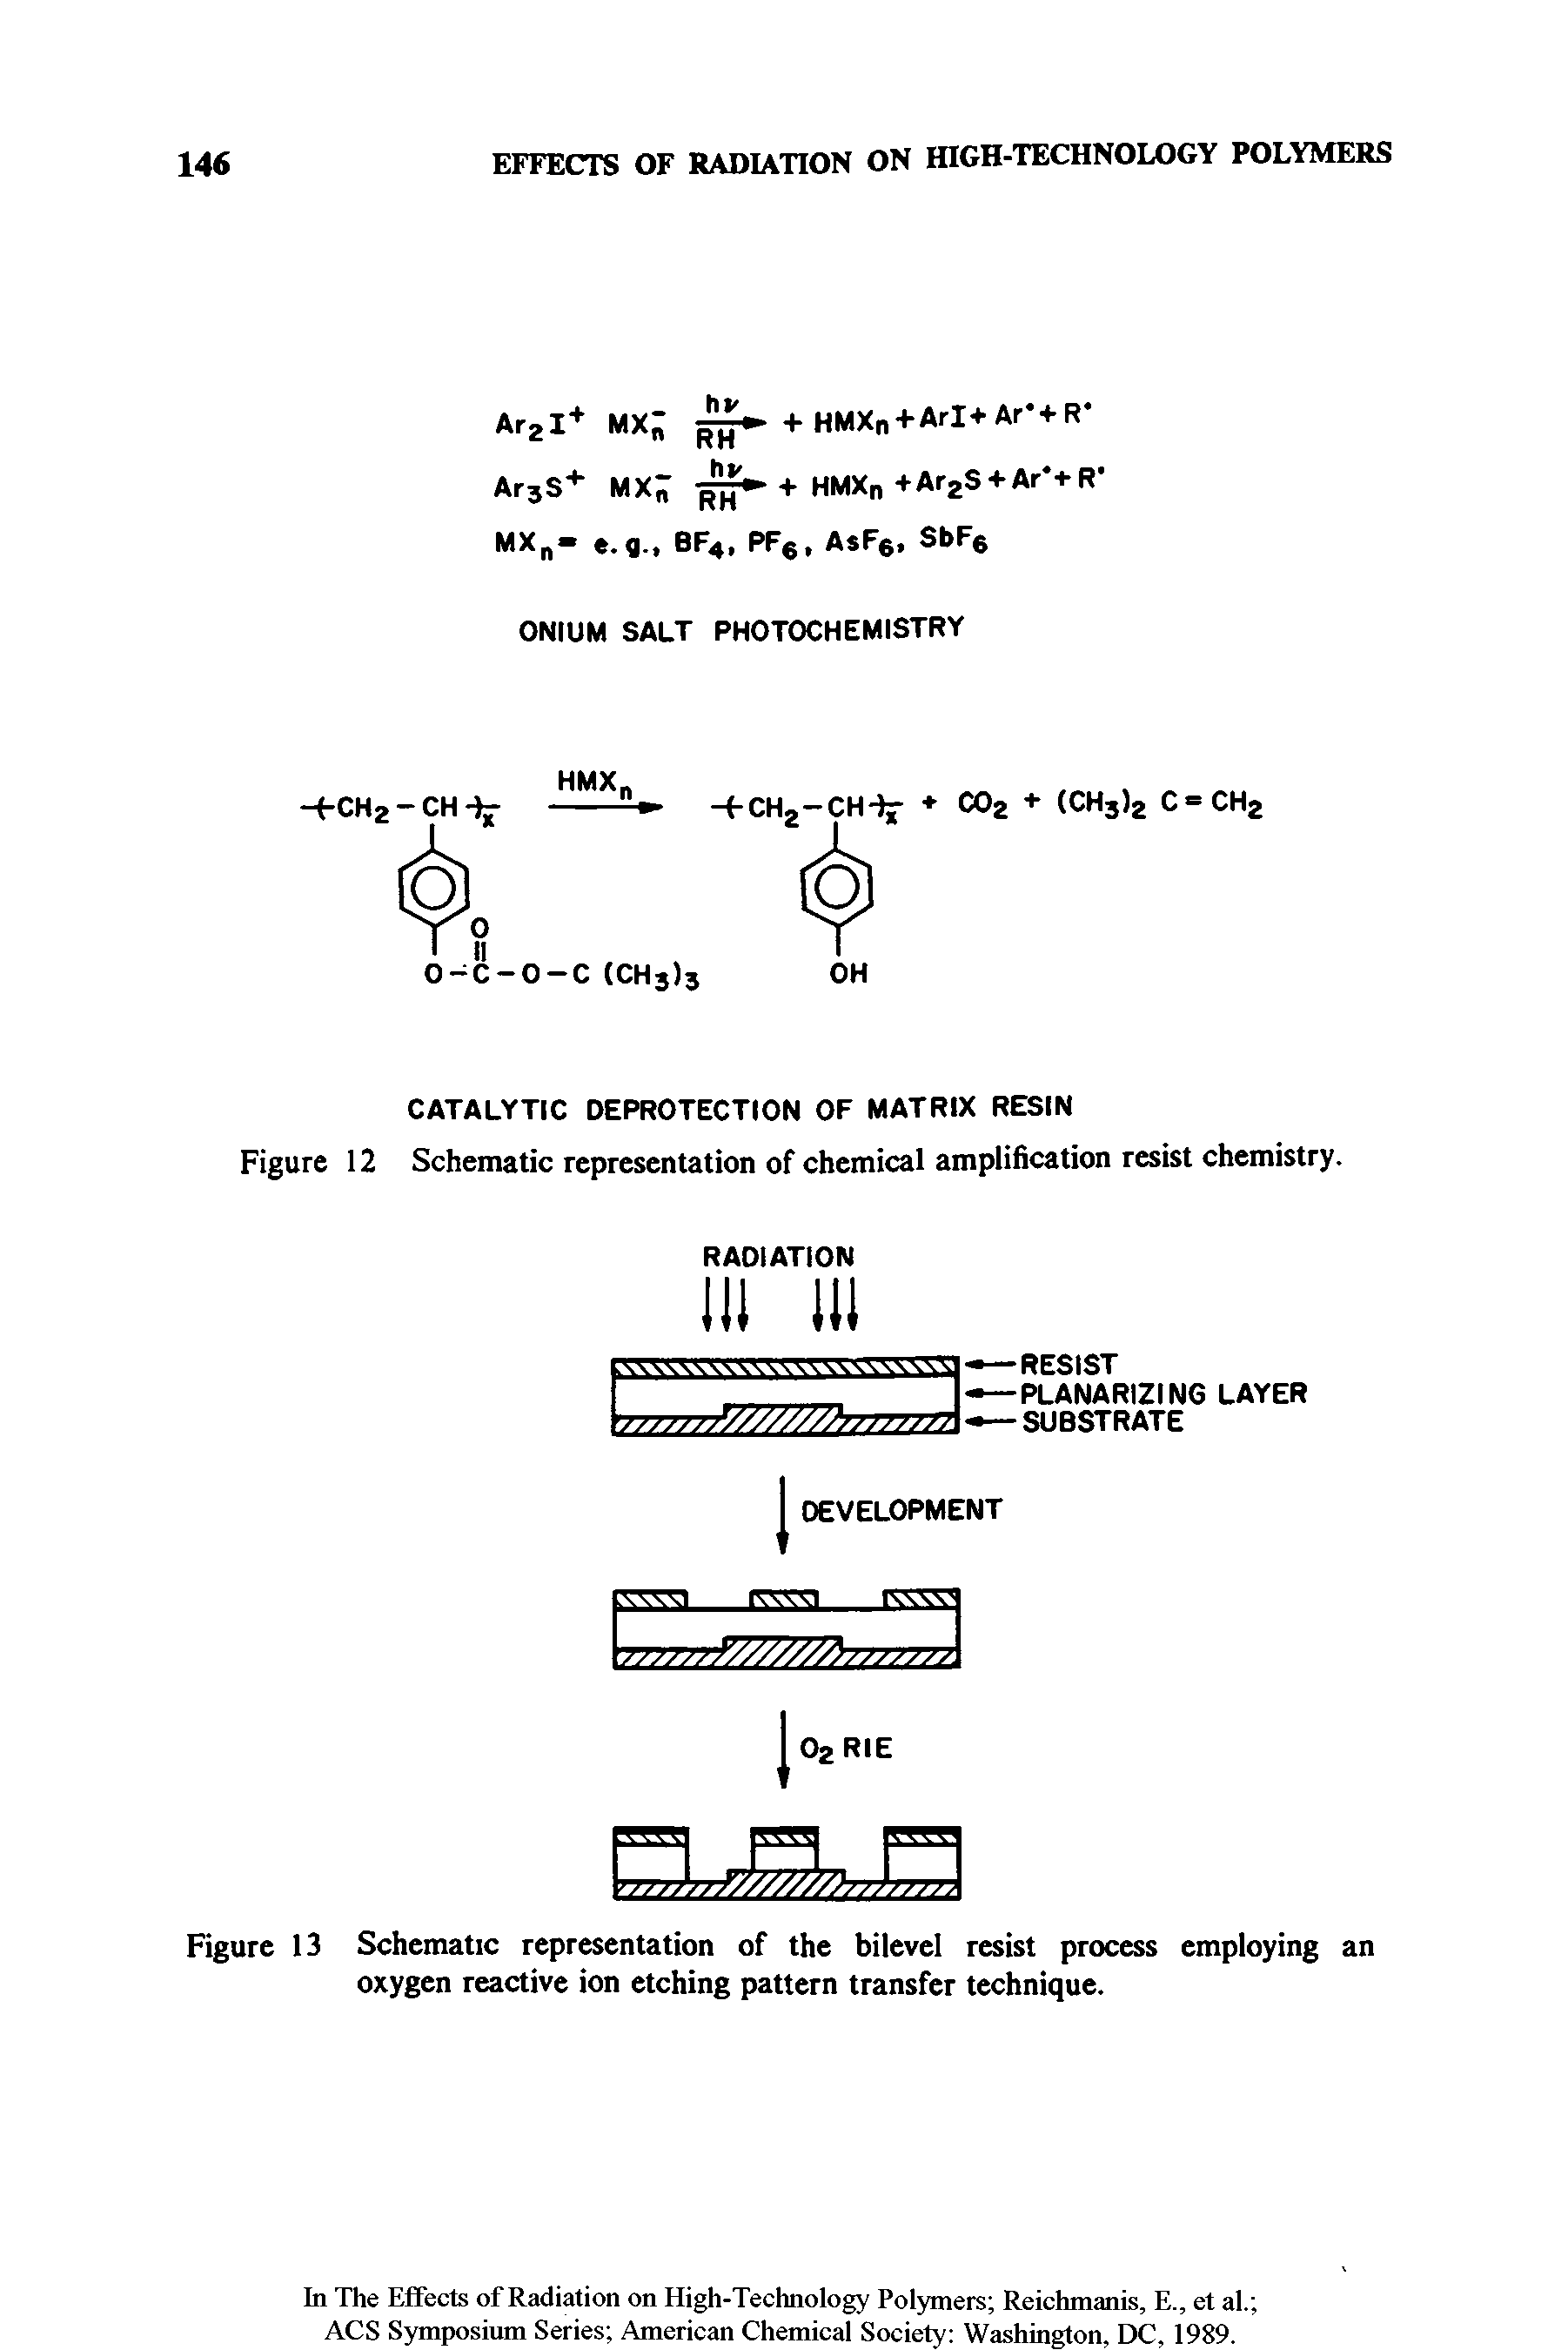 Figure 12 Schematic representation of chemical amplification resist chemistry.